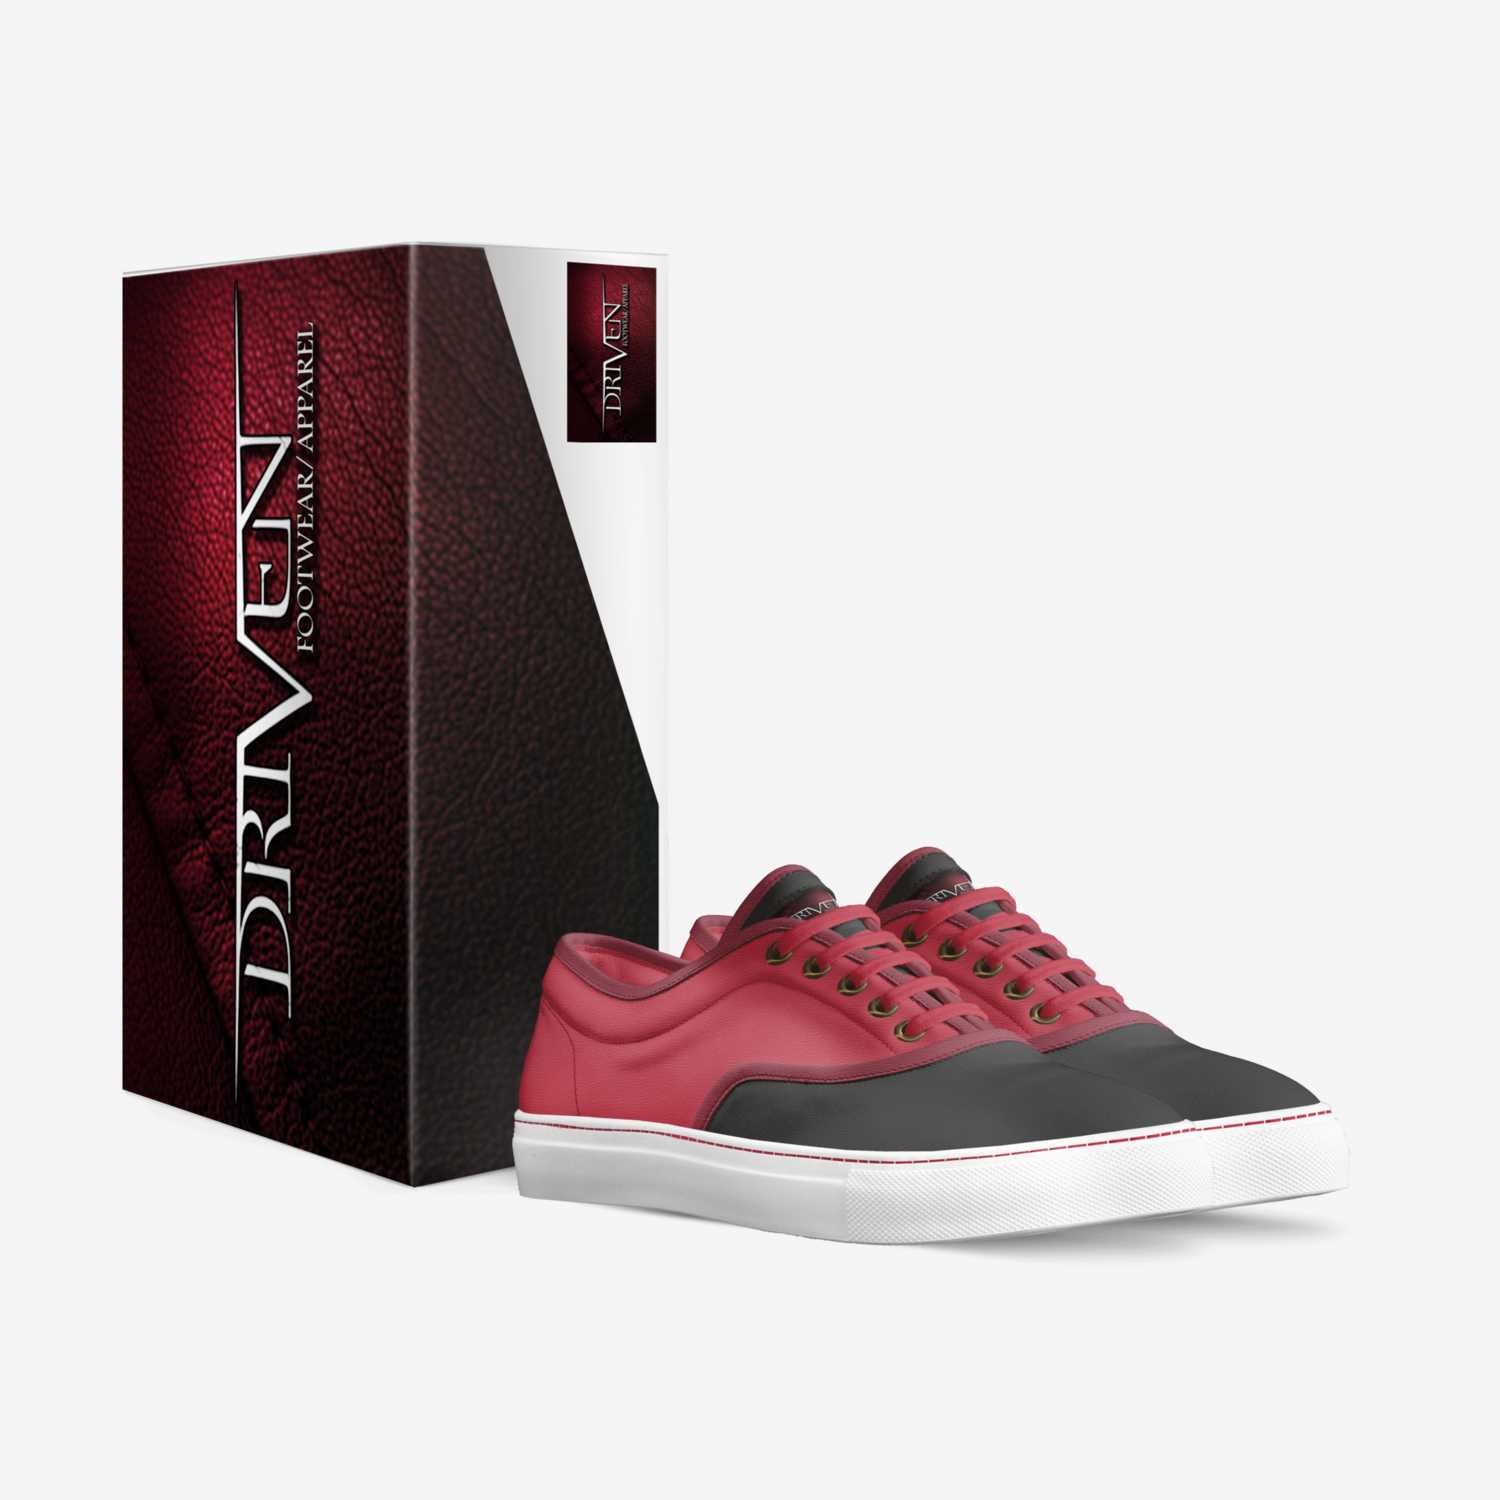 Driven Red-Omega custom made in Italy shoes by Jason Oberly | Box view